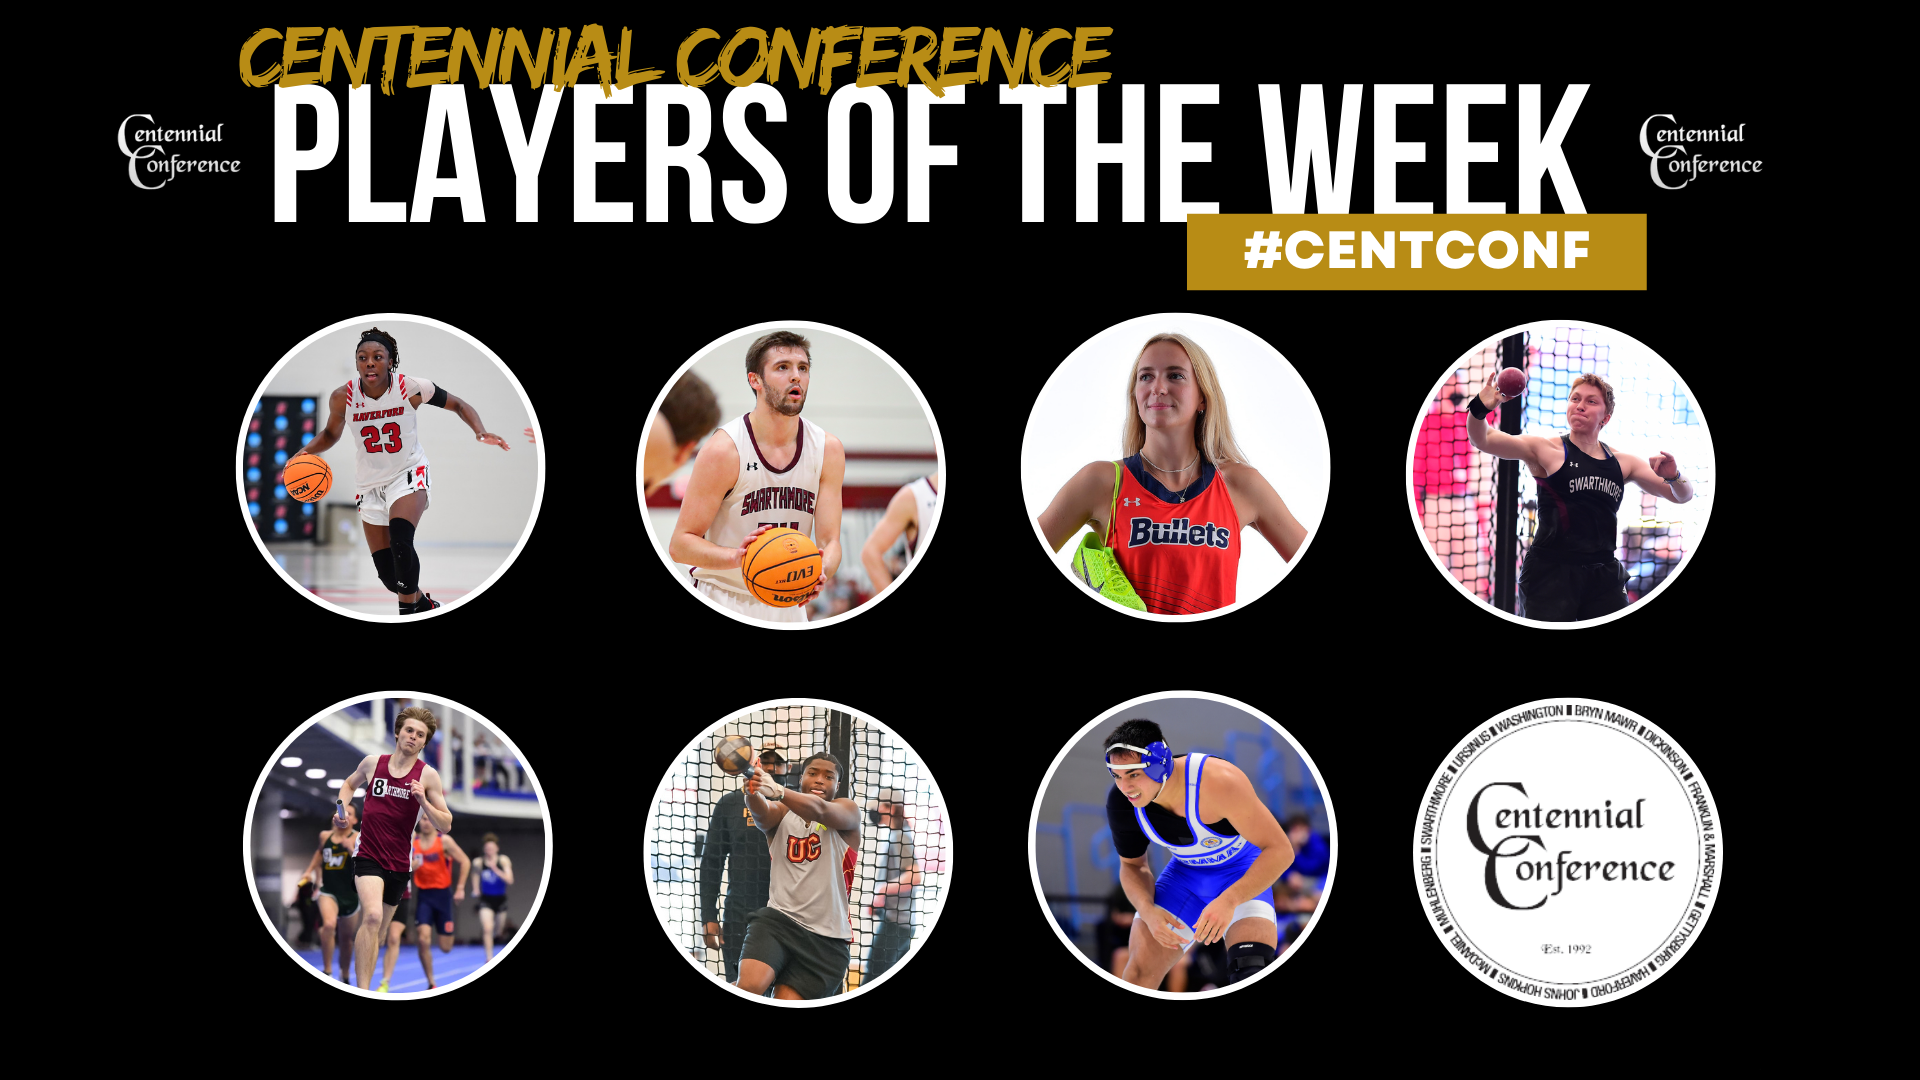 Centennial Conference Athletes of the Week - Dec. 5-11